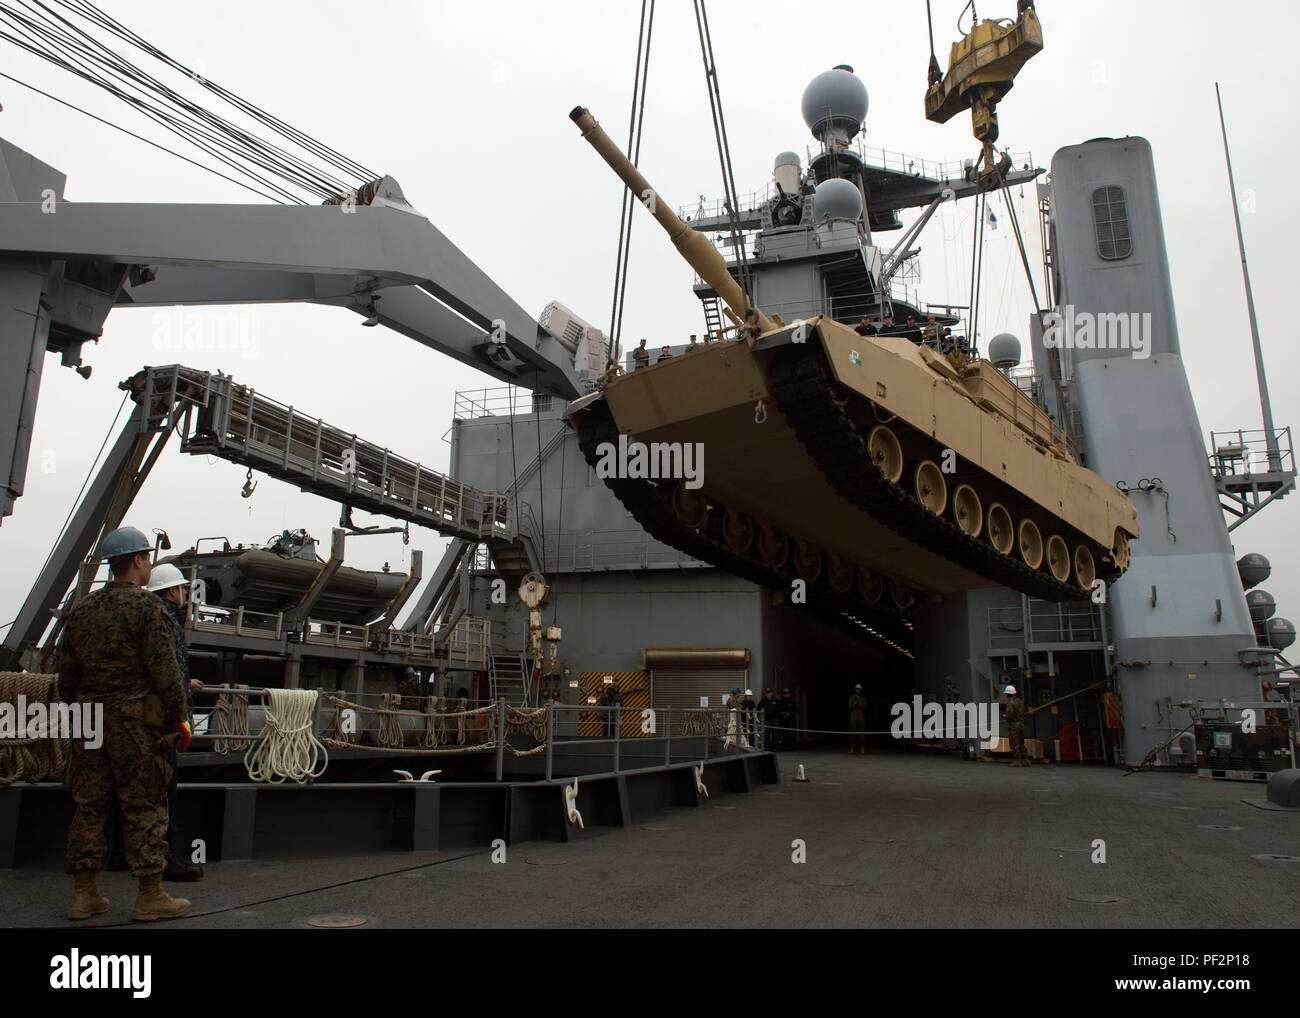 160313-N-KB426-043  GWANGYANG, Republic of Korea (March 13, 2016) Amphibious dock landing ship USS Germantown (LSD 42) onloads a M1A1 Abrams Main Battle Tank, attached to Delta Company 1st Tank Battalion, Delta Company, 1st U.S. Marine Division. Germantown is assigned to the Bonhomme Richard Expeditionary Strike Group (BHRESG) and is participating in Ssang Yong 16 a biennial combined amphibious exercise designed to strengthen interoperability and working relationships across a wide range of military operations from disaster relief to complex expeditionary operations. (U.S. Navy photo by Mass C Stock Photo